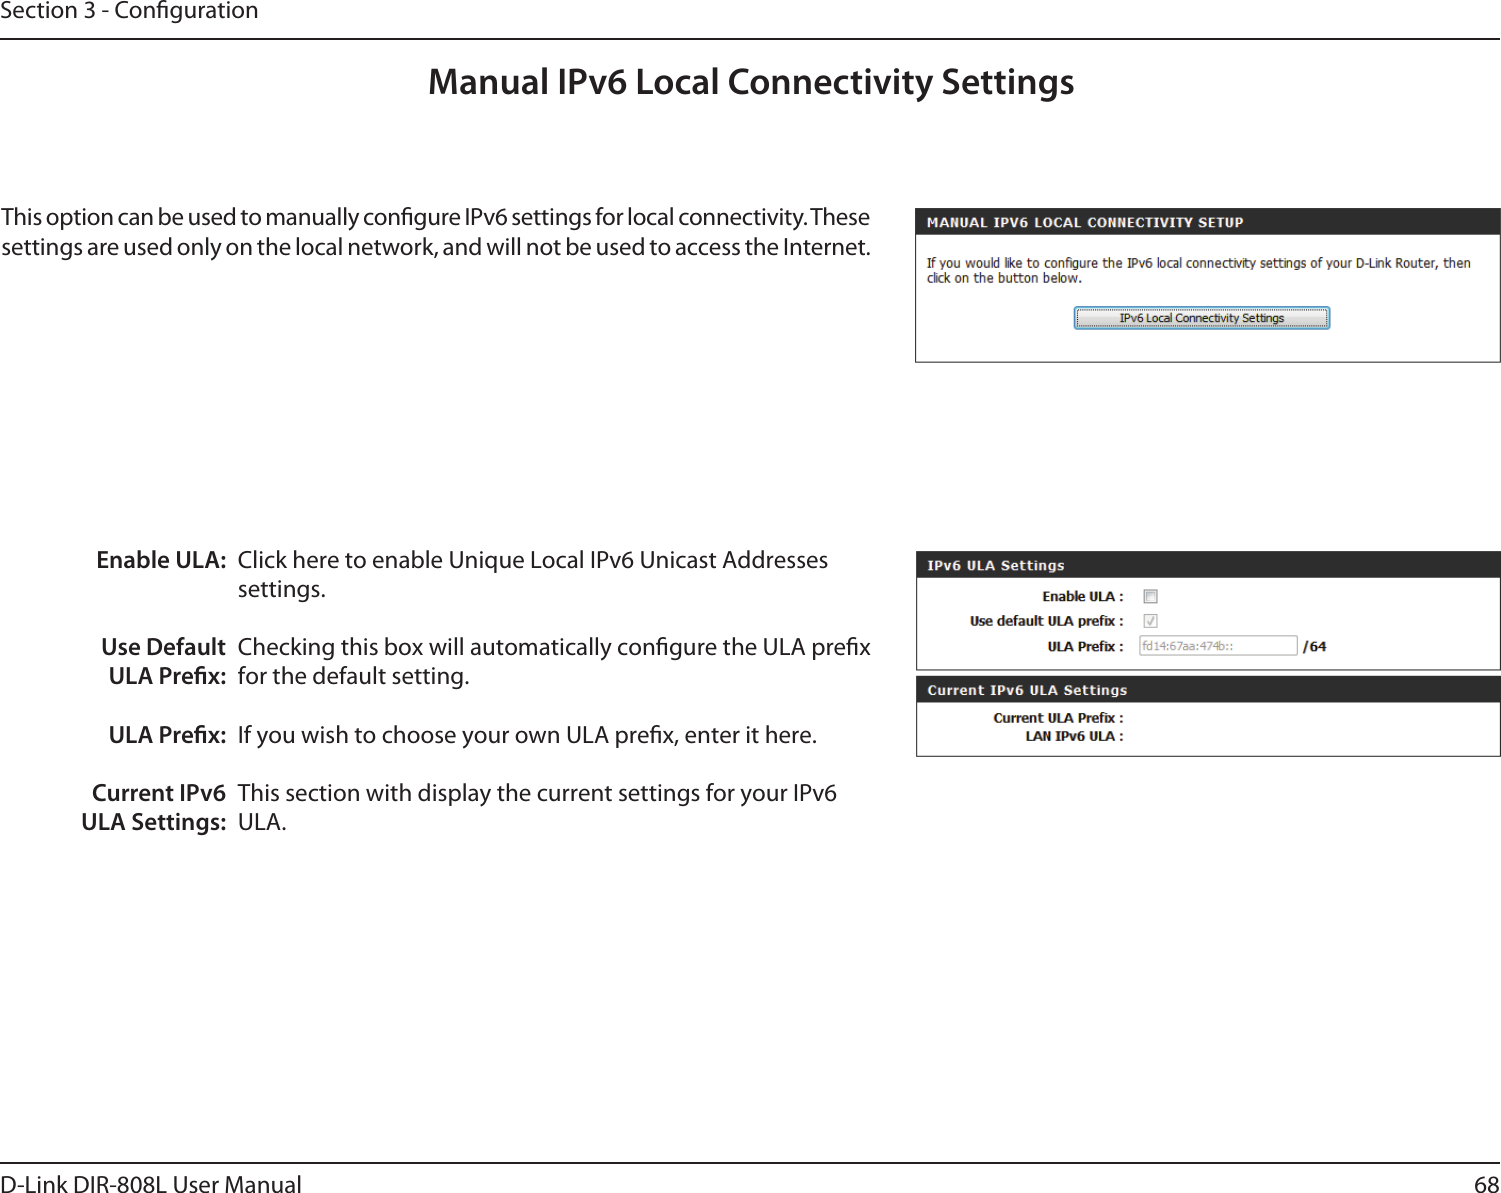 68D-Link DIR-808L User ManualSection 3 - CongurationManual IPv6 Local Connectivity SettingsEnable ULA:Use Default ULA Prex:ULA Prex:Current IPv6 ULA Settings:Click here to enable Unique Local IPv6 Unicast Addresses  settings.Checking this box will automatically congure the ULA prex  for the default setting.If you wish to choose your own ULA prex, enter it here.This section with display the current settings for your IPv6  ULA.This option can be used to manually congure IPv6 settings for local connectivity. These settings are used only on the local network, and will not be used to access the Internet.